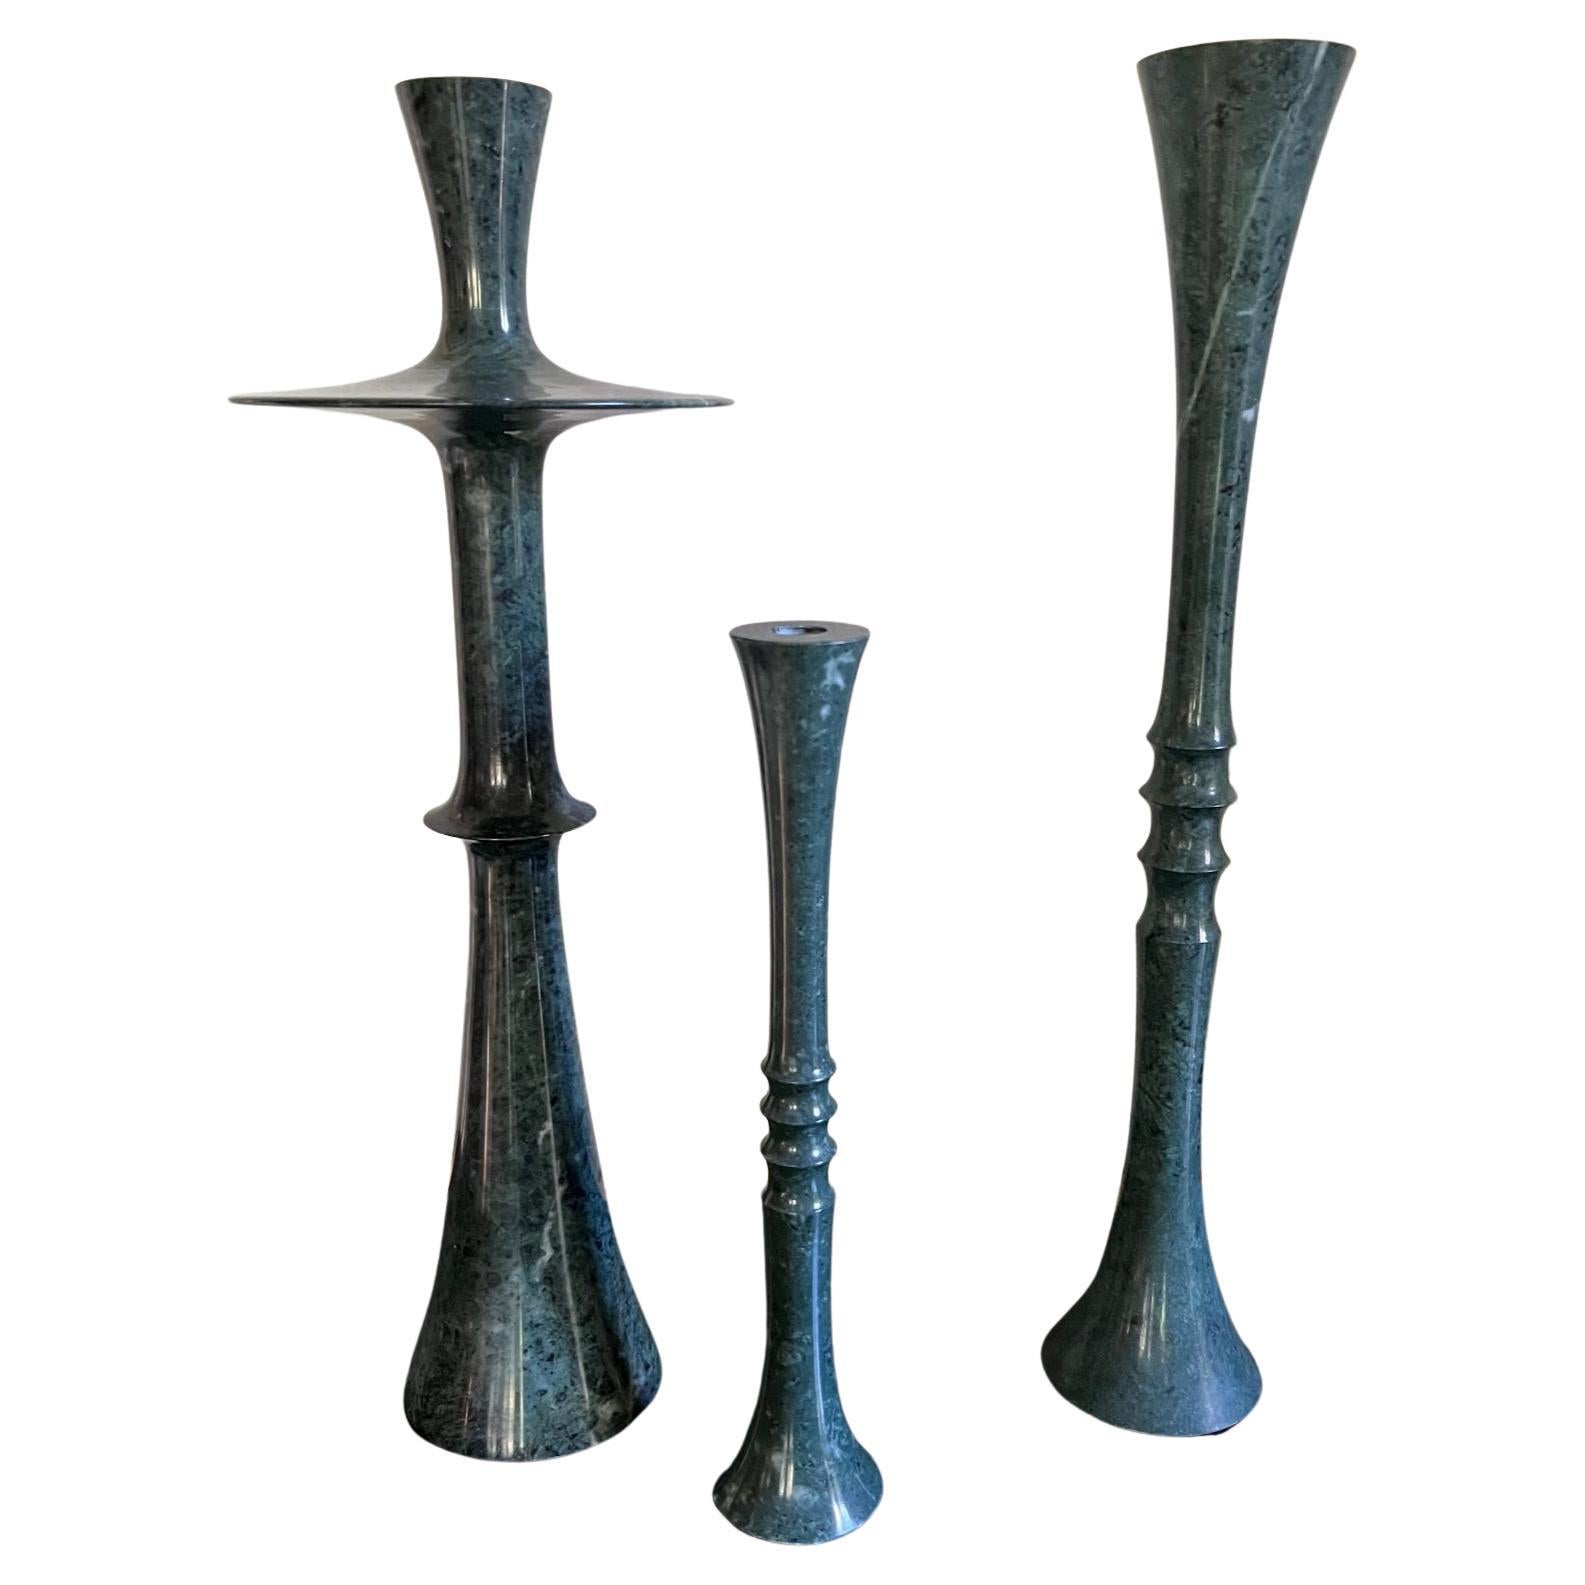 Solid marble candlestick set of three designed by French designer Paul Mathieu for Stephanie Odegard Co. Ltd. 

The marble candlesticks are hand turned, crafted in India and are symbolic of the hallmarks of Mathieu's work which includes graceful